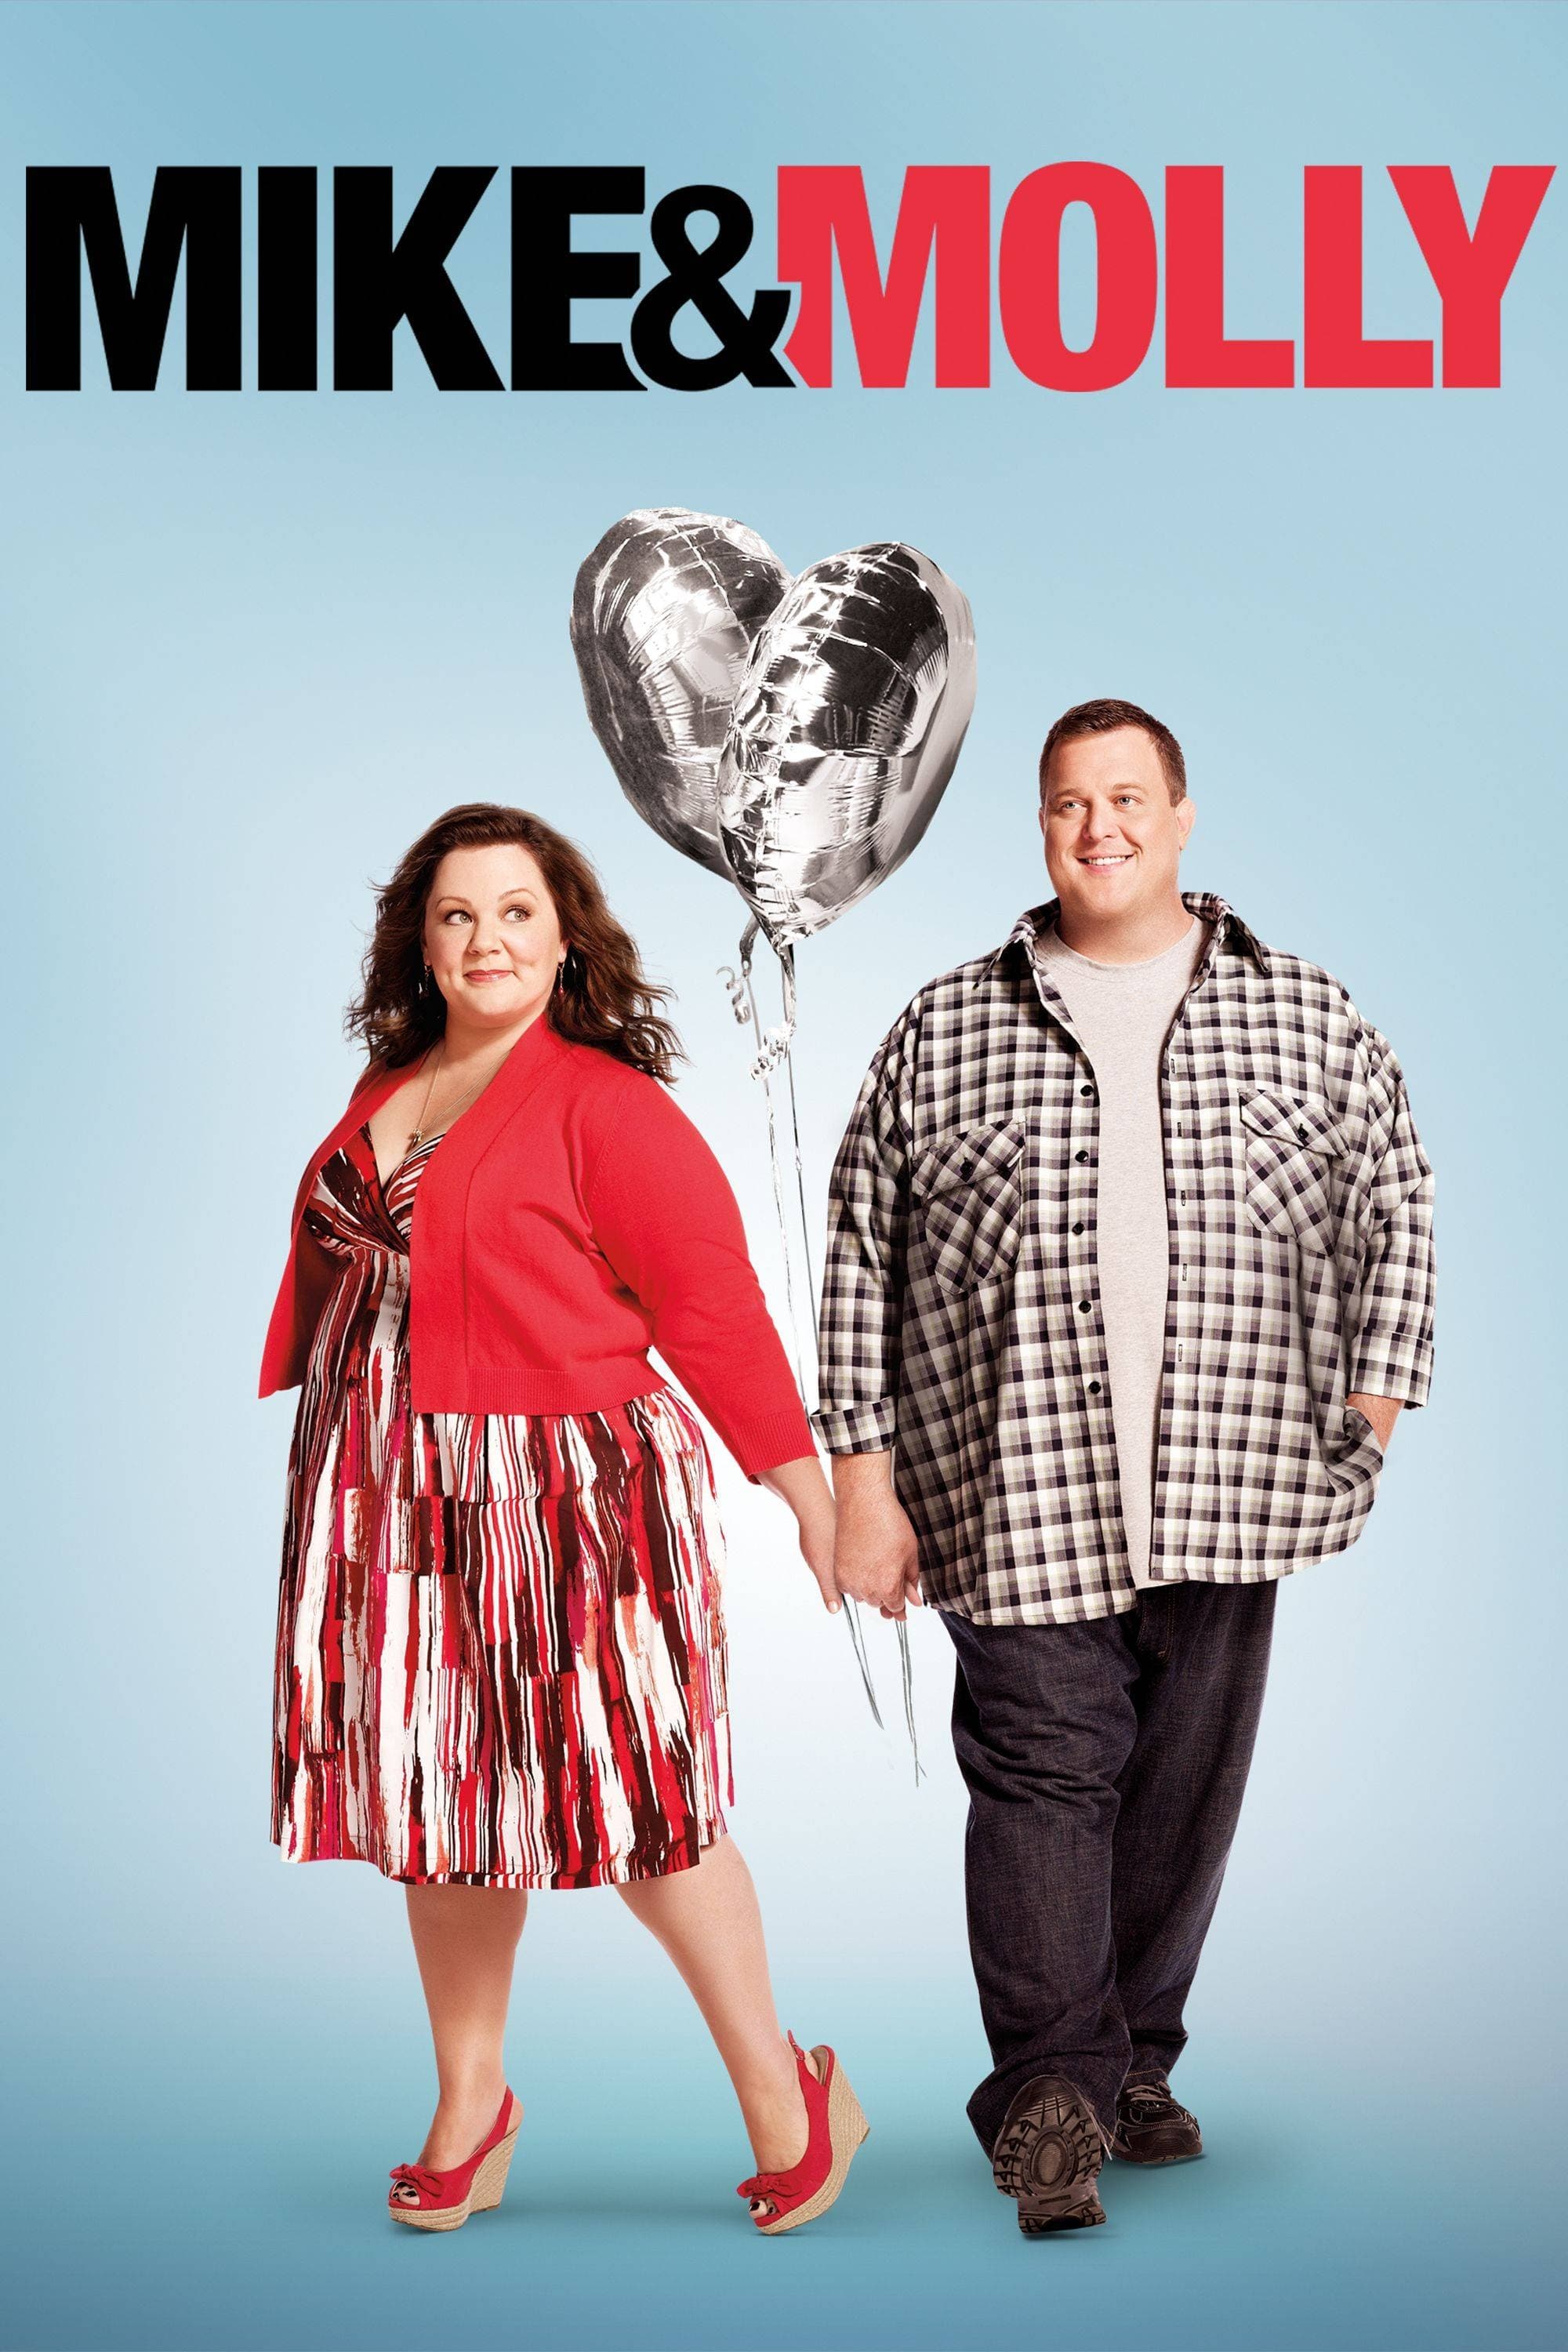 Mike & Molly (2010)